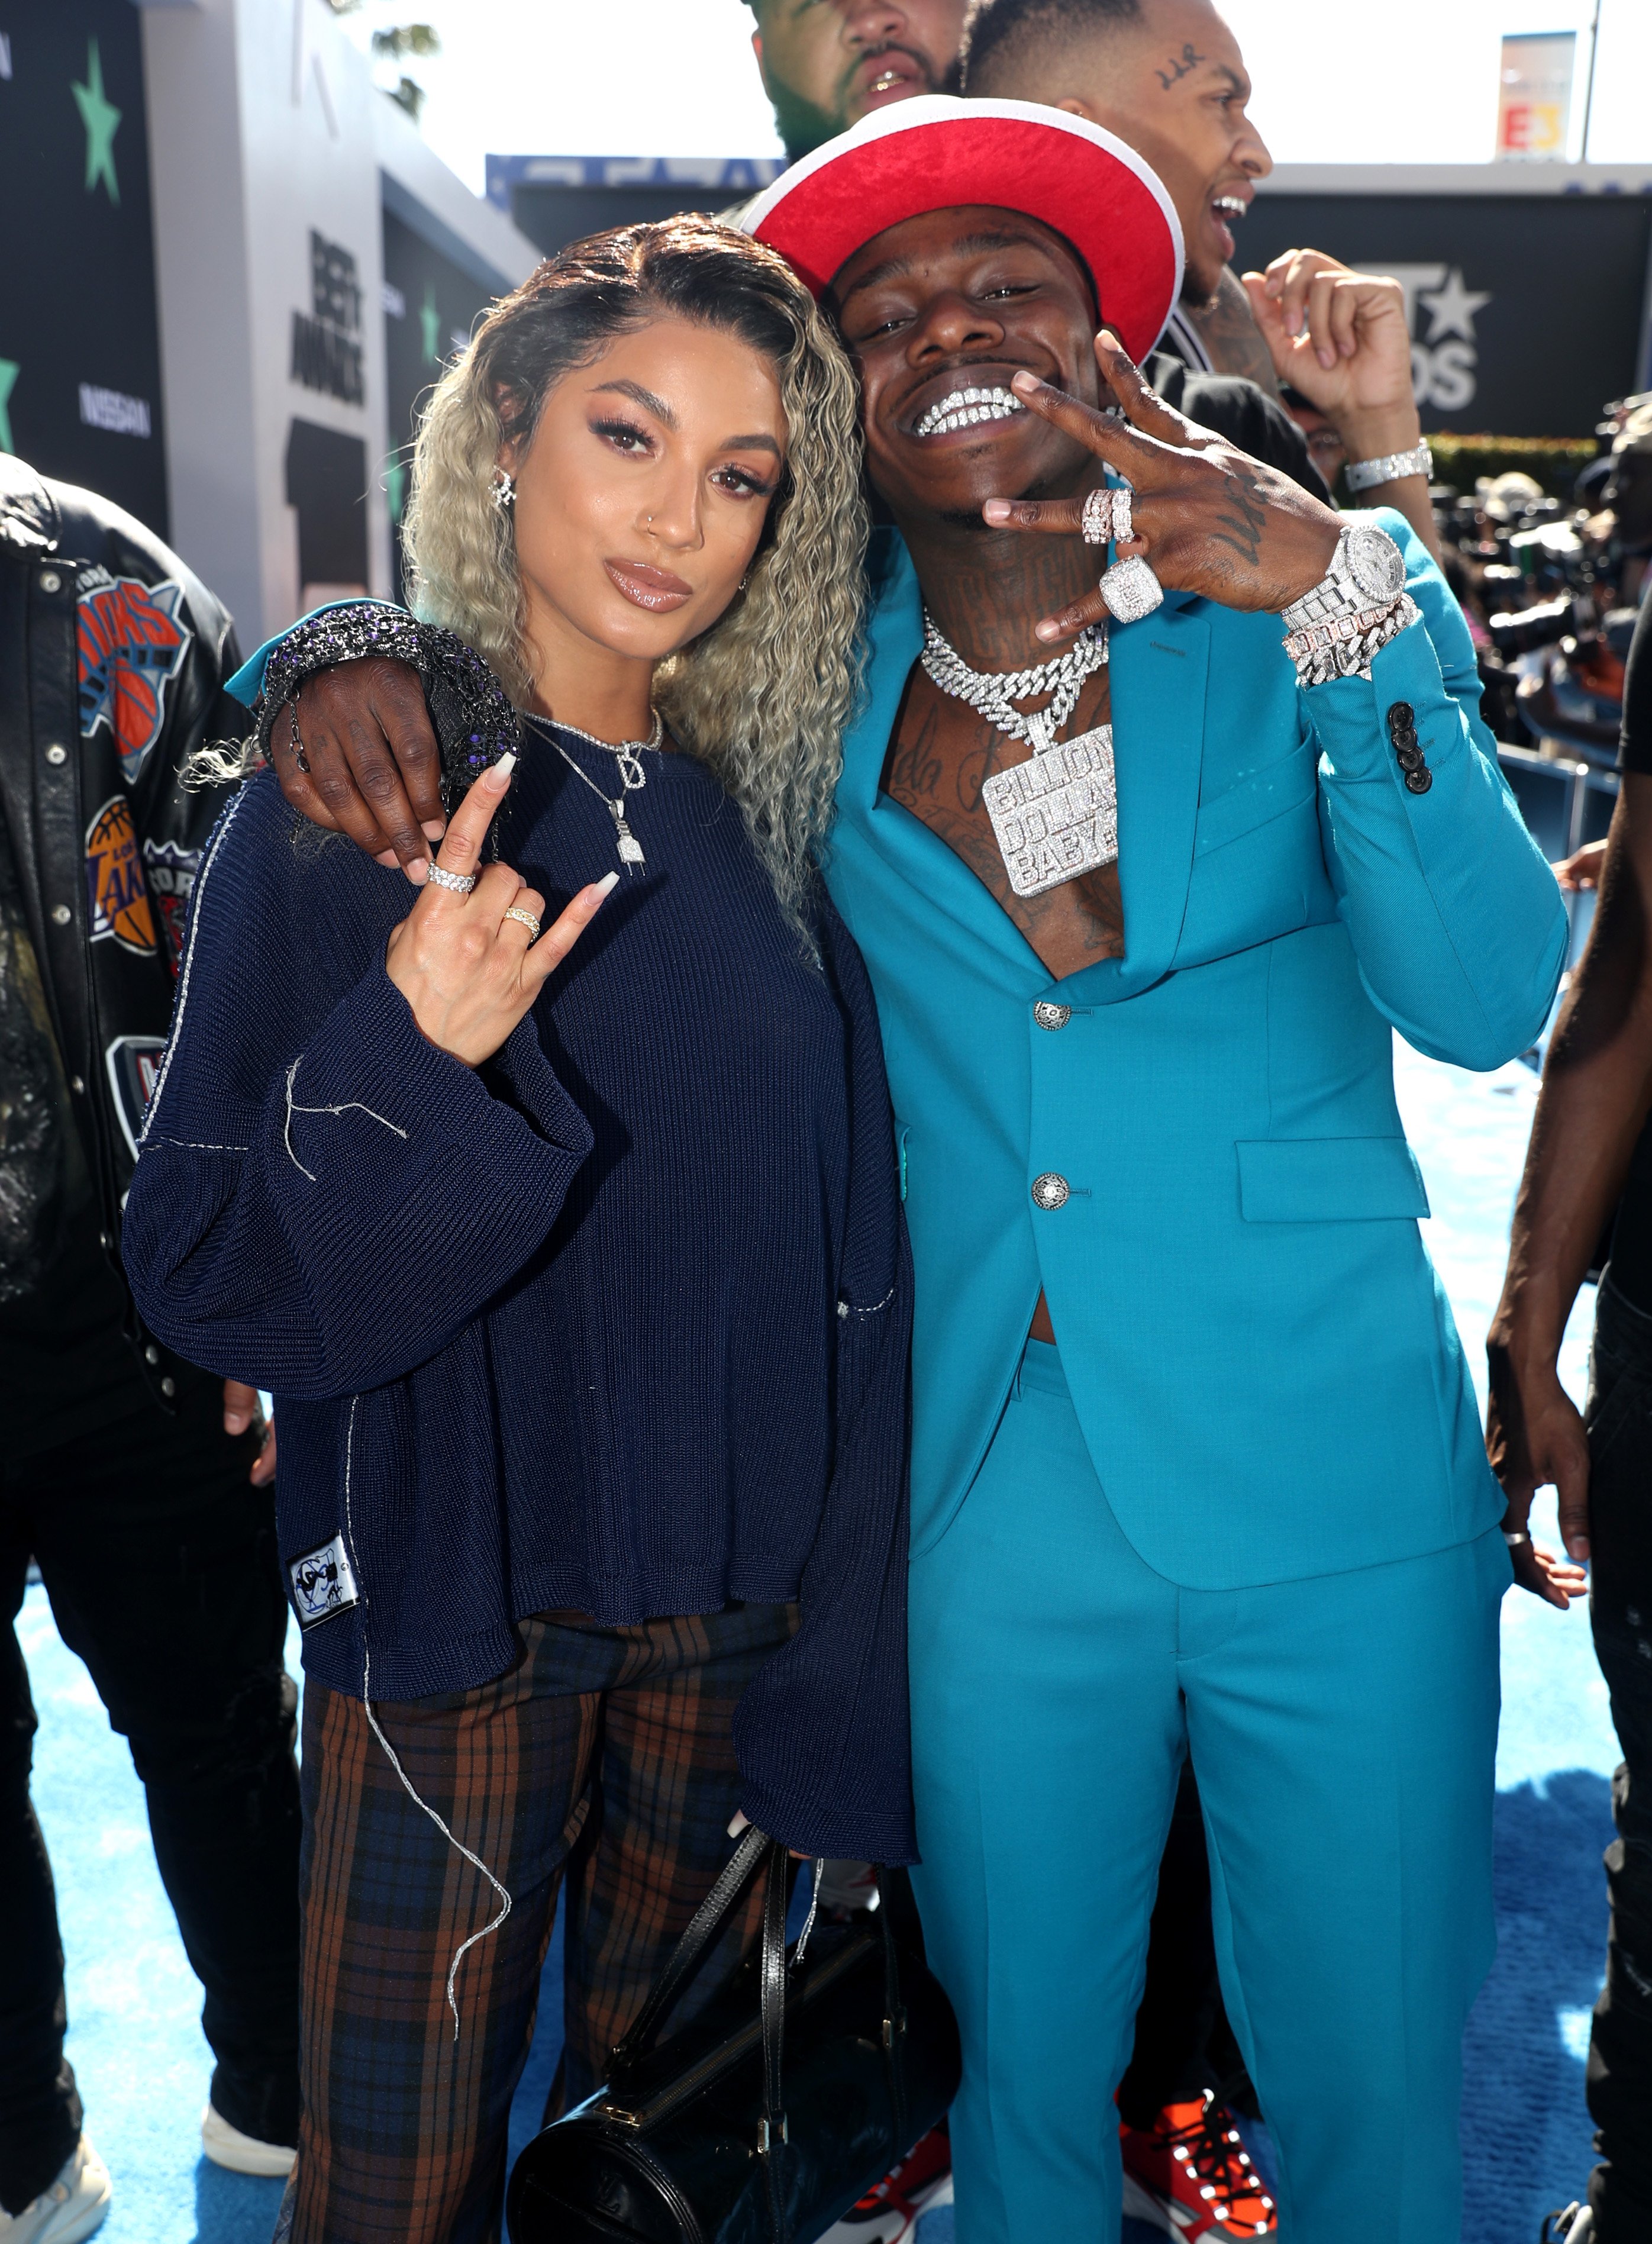 DaBaby and DaniLeigh's Relationship Is Over, Singer Says She's